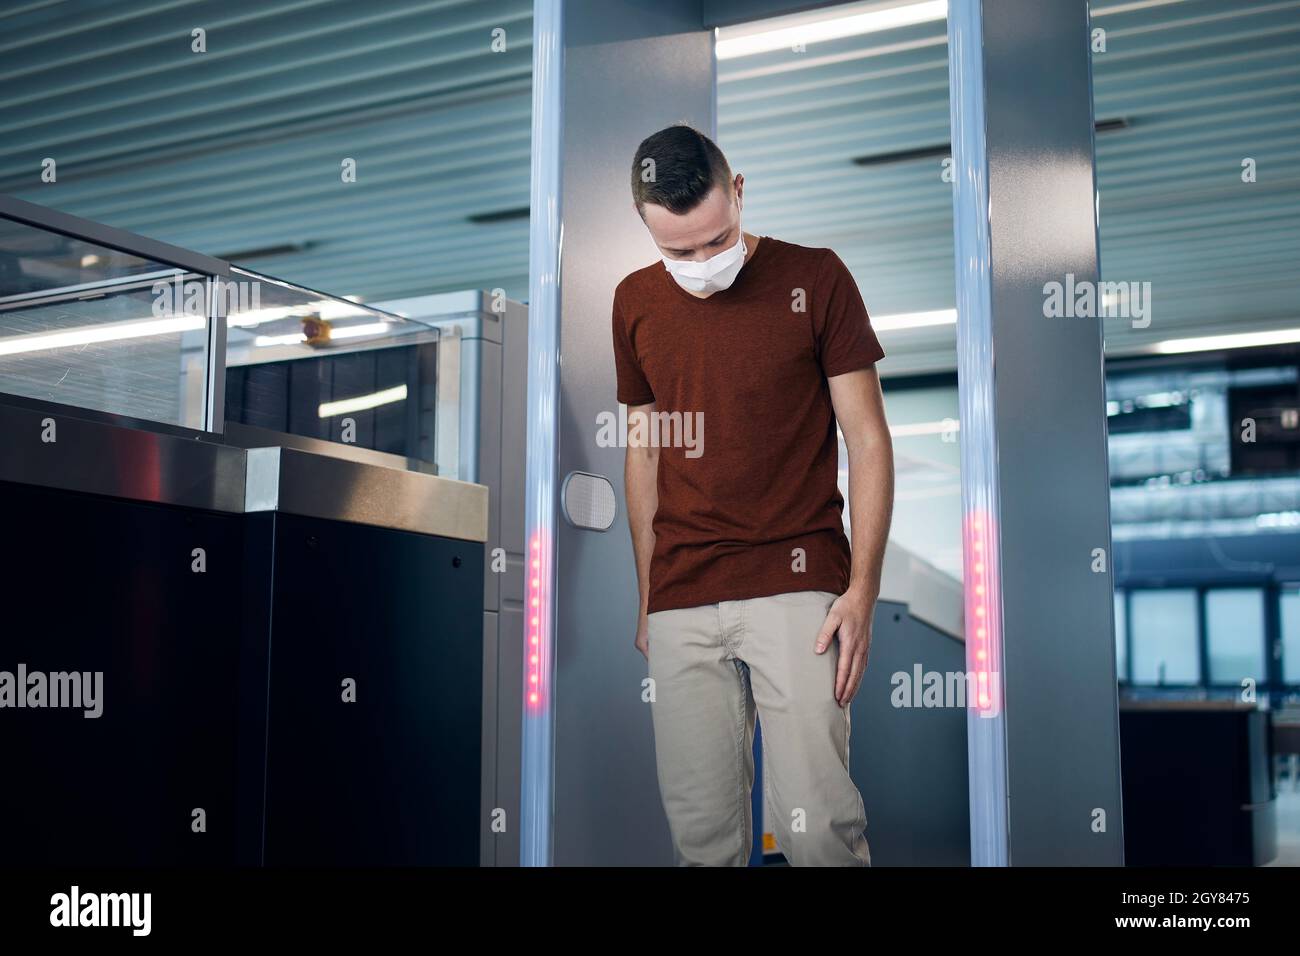 Security checkpoint at airport. Passengers passing through gate of metal detector. Stock Photo